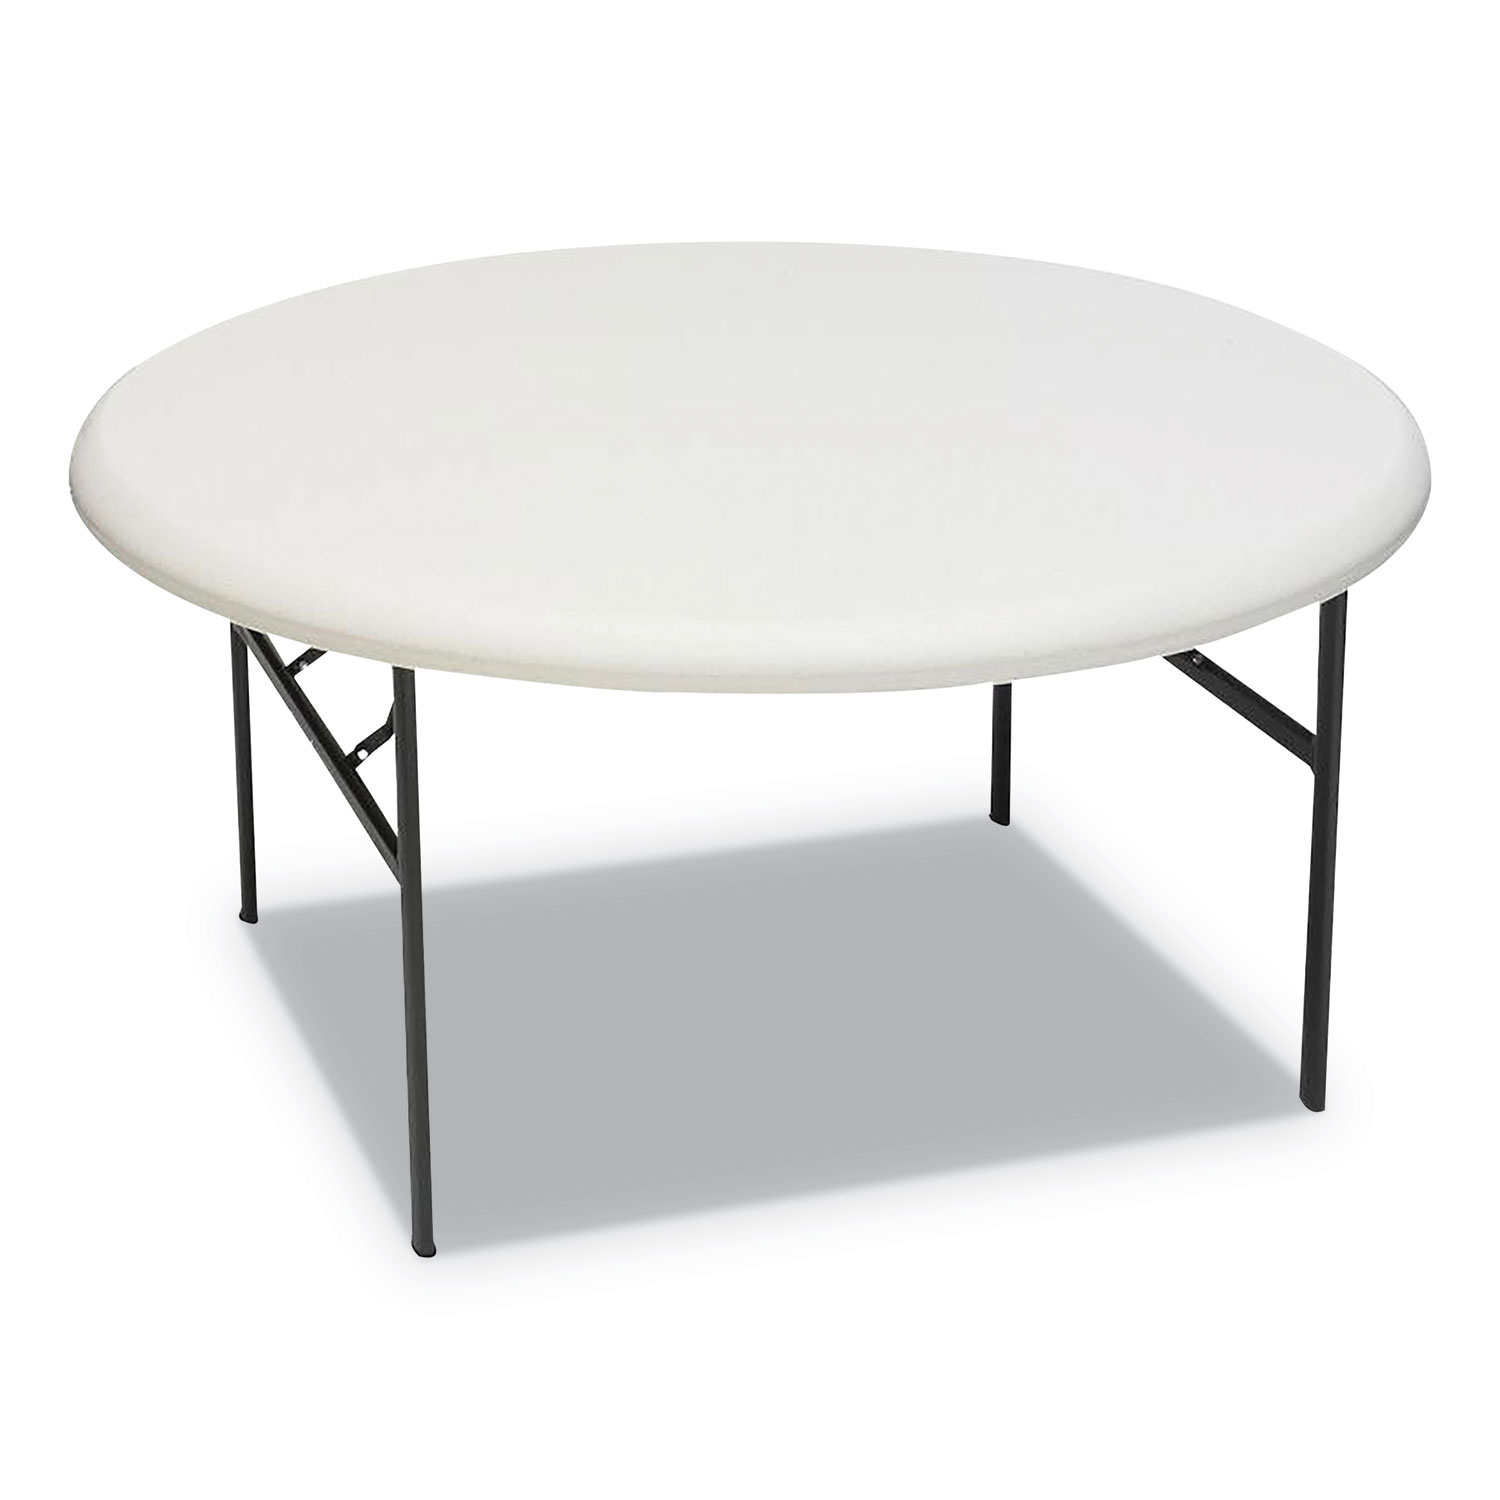  Iceberg 65263 IndestrucTables Too 1200 Series Resin Folding Table, 60 dia x 29h, Platinum (ICE65263) 